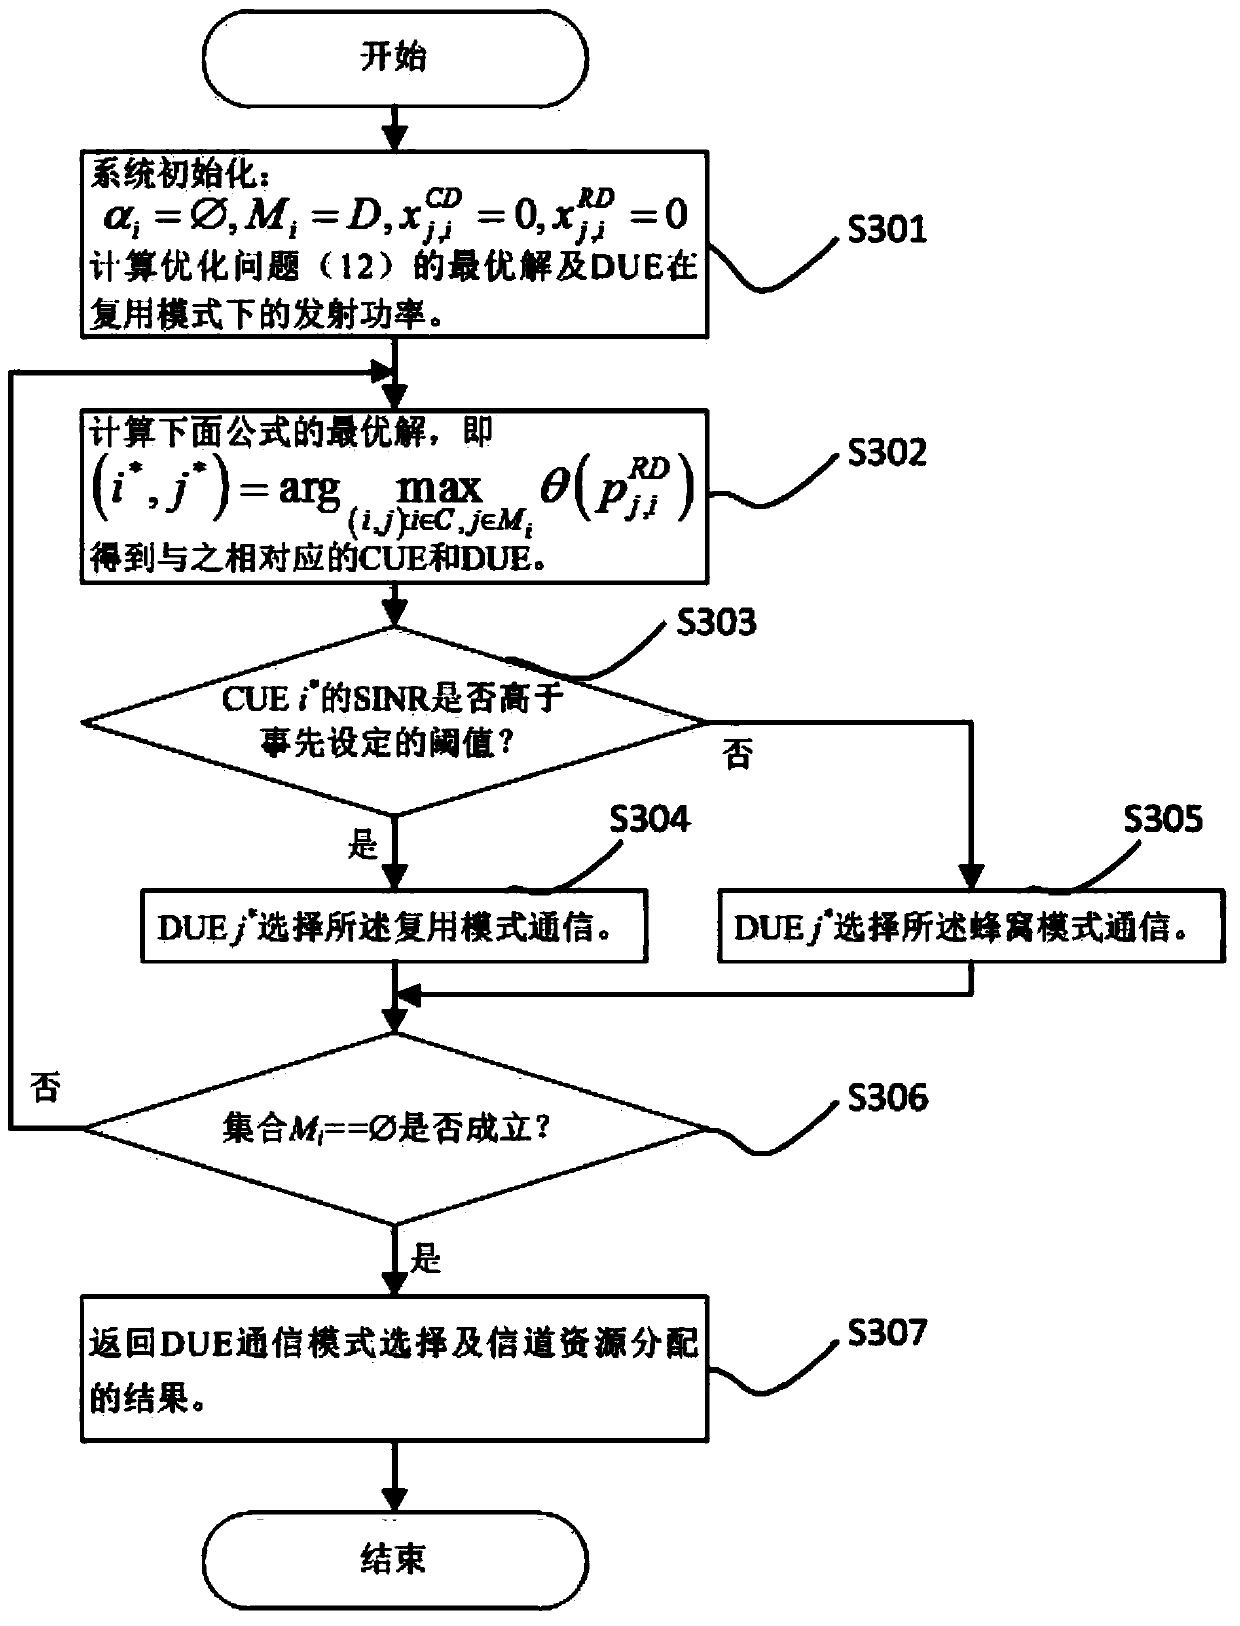 D2D mode selection and resource allocation method in LTE-A network